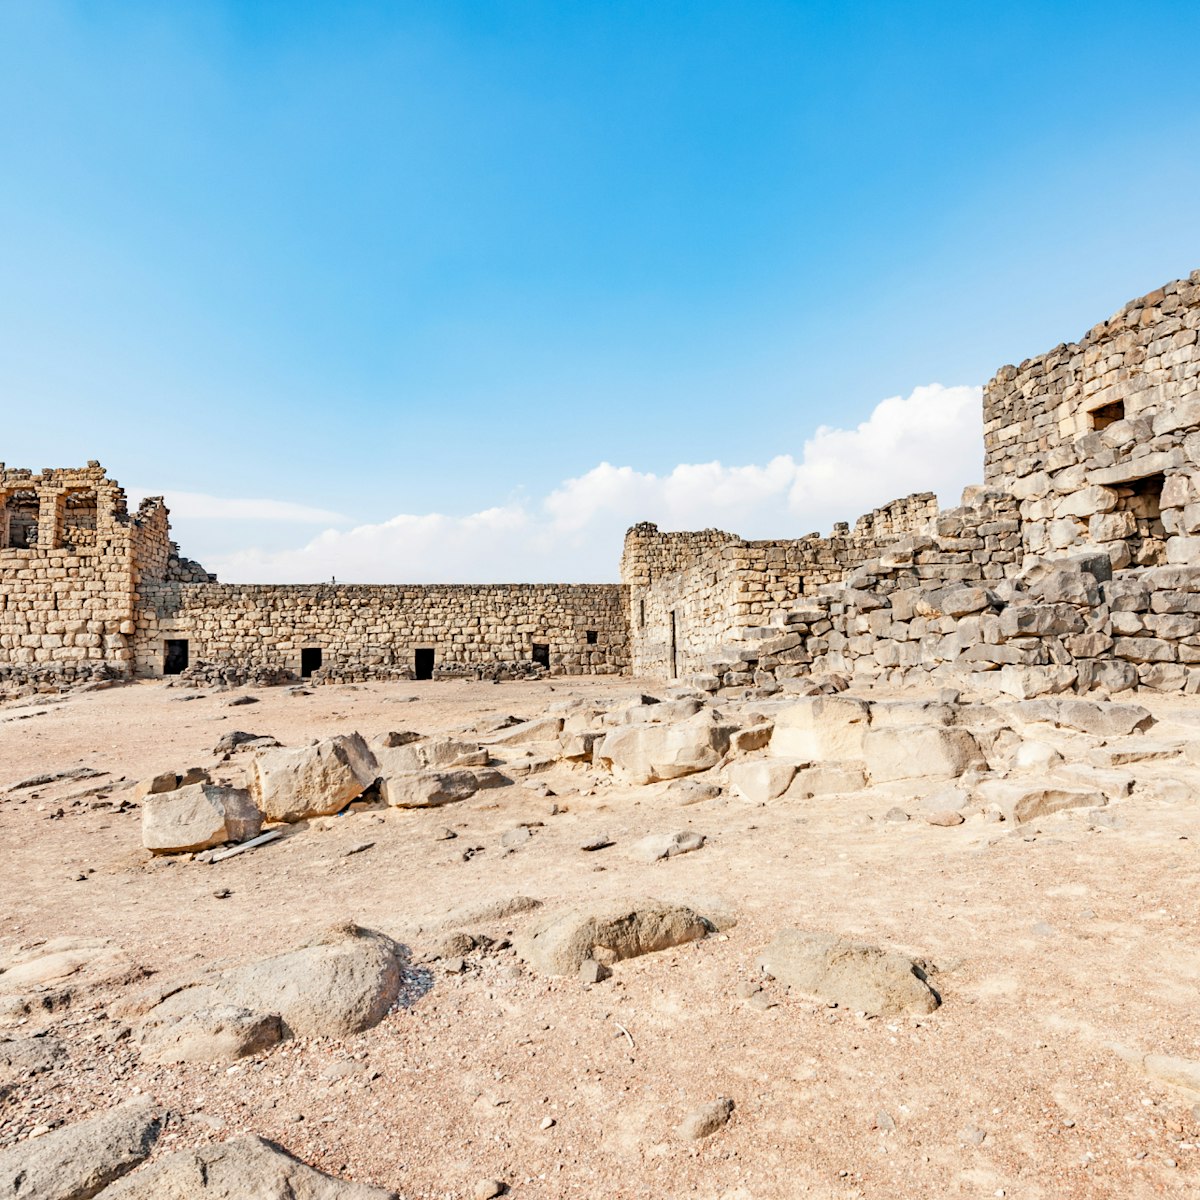 Qasr Azraq in present-day eastern Jordan. It is located about 100 km east of Amman. Qasr Azraq is one of the desert castles in Jordan and is known as Qasr Al Azraq.; Shutterstock ID 300918770; Your name (First / Last): Lauren Keith; GL account no.: 65050; Netsuite department name: Content Asset; Full Product or Project name including edition: Jordan 2017